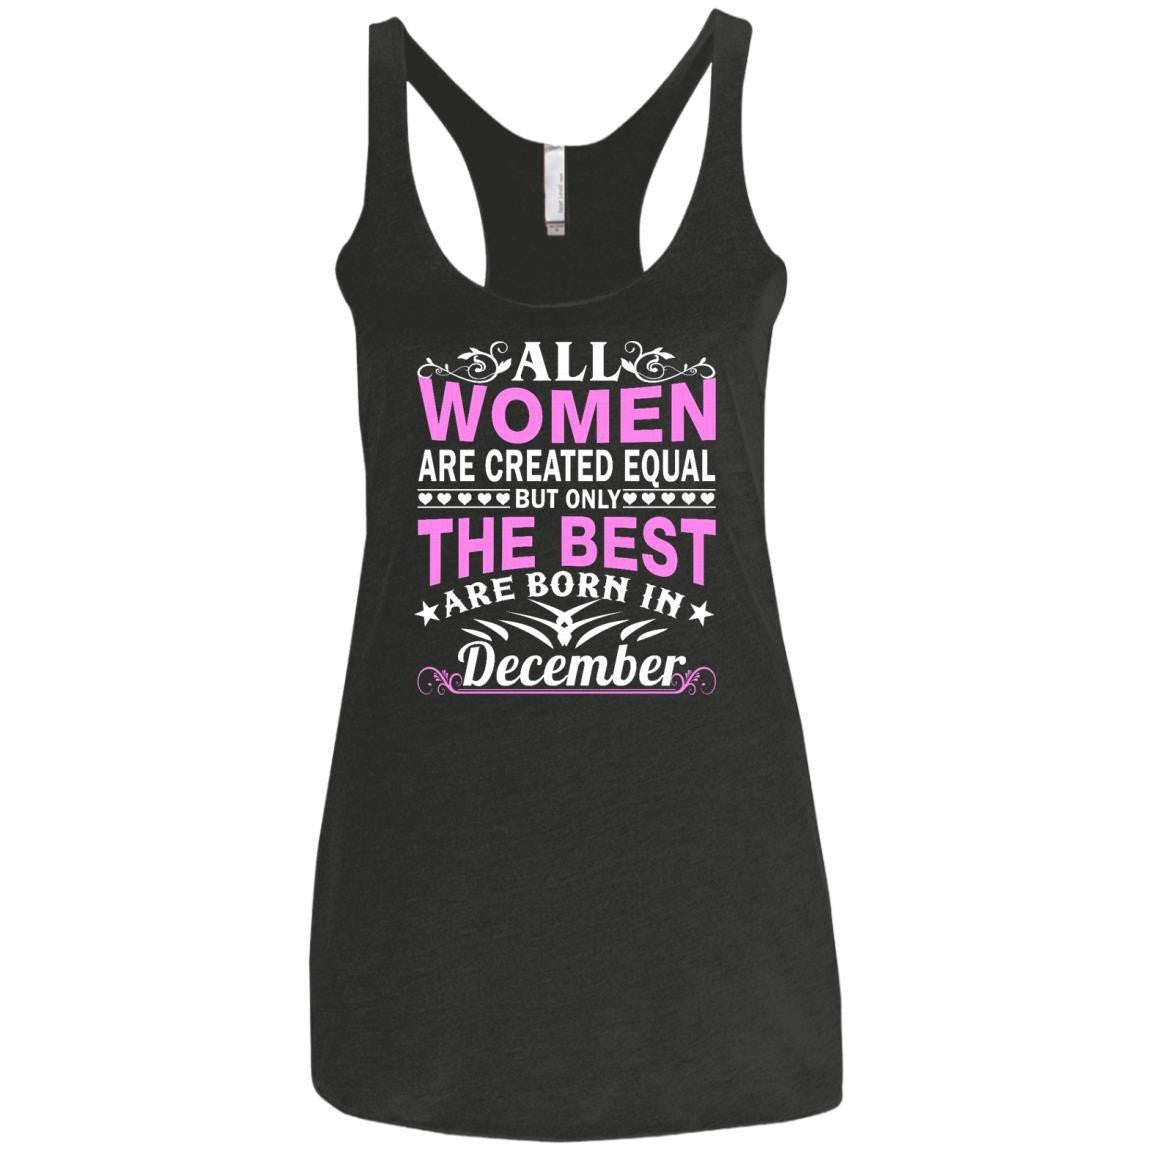 All Women Are Created Equal But Only The Best Are Born In December shirt, tank